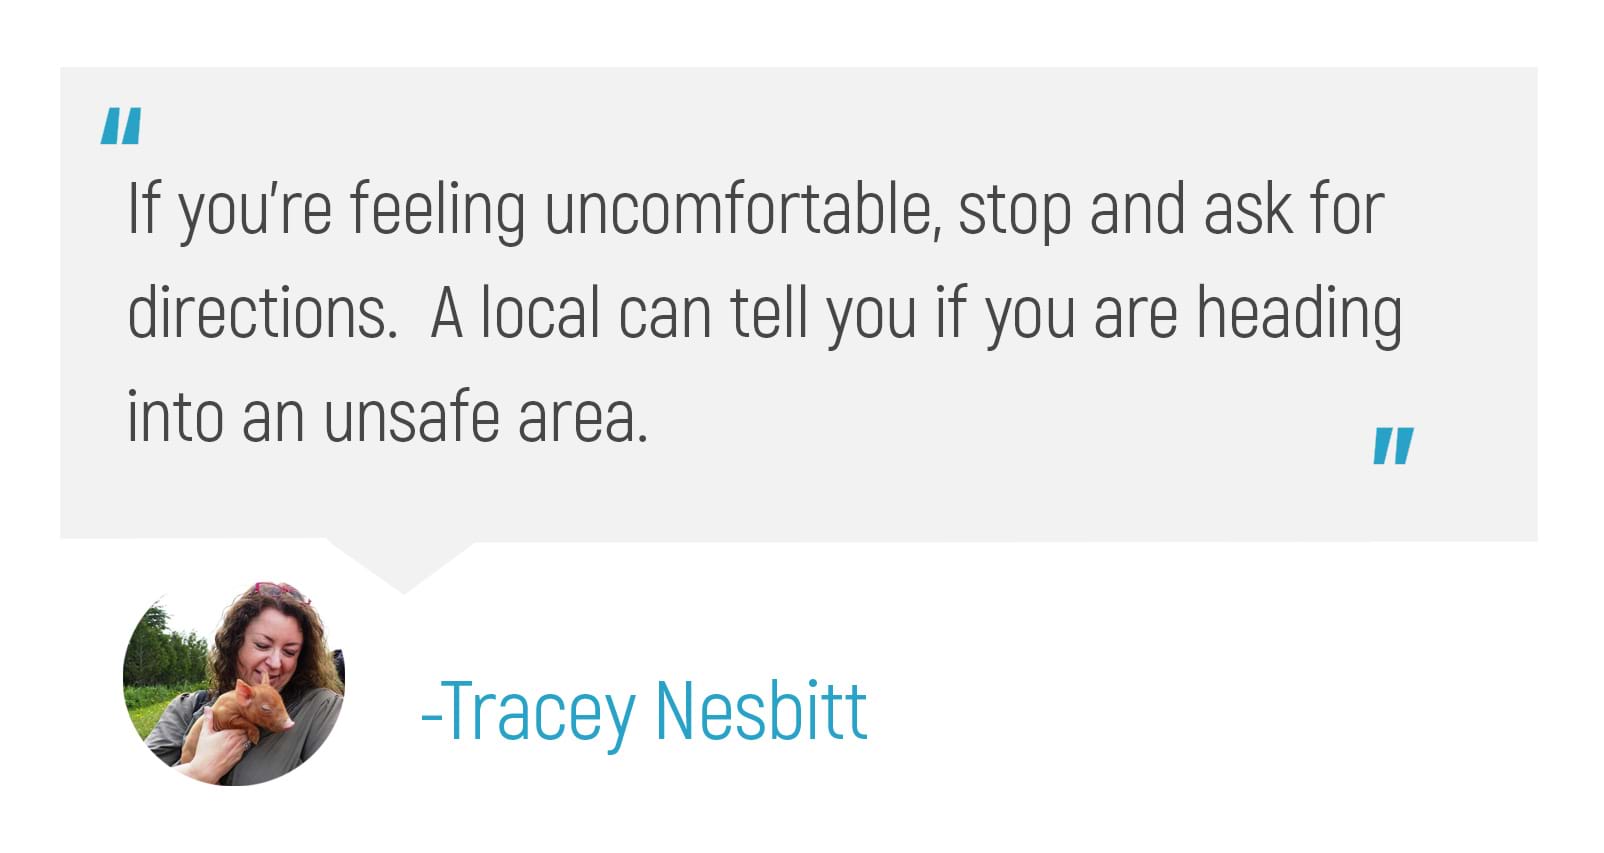 "If you're feeling uncomfortable, stop and ask for directions. A local can tell you if you are heading into an unsafe area."